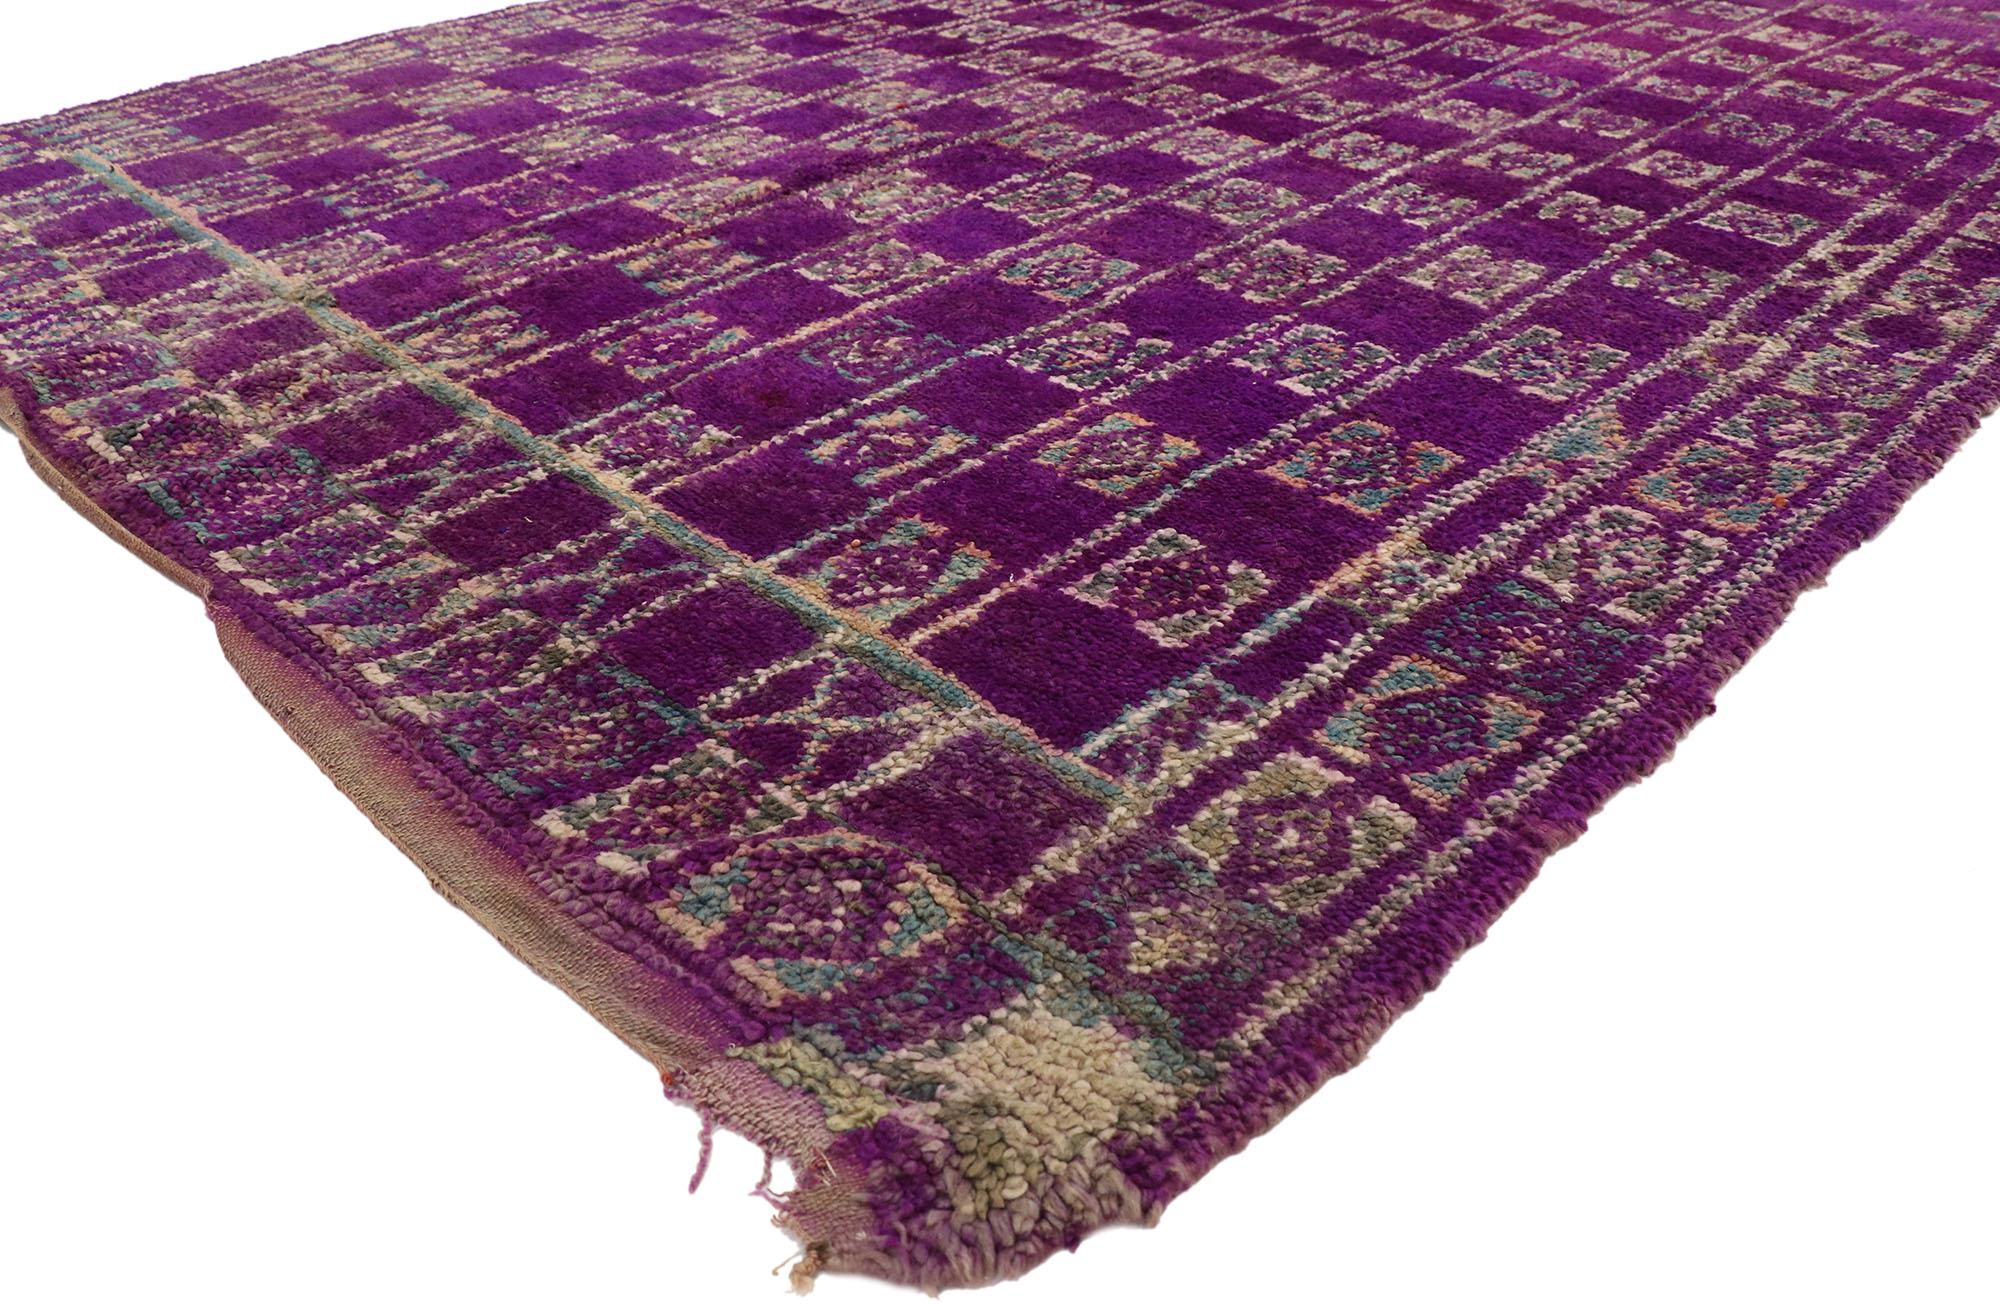 20905 Vintage Purple Talsint Moroccan Rug, 06'05 x 12'00. Talsint Moroccan rugs, originating from the Figuig area within the Aït Bou Ichaouen region of eastern Morocco, particularly in the remote Atlas Mountains, are celebrated for their traditional